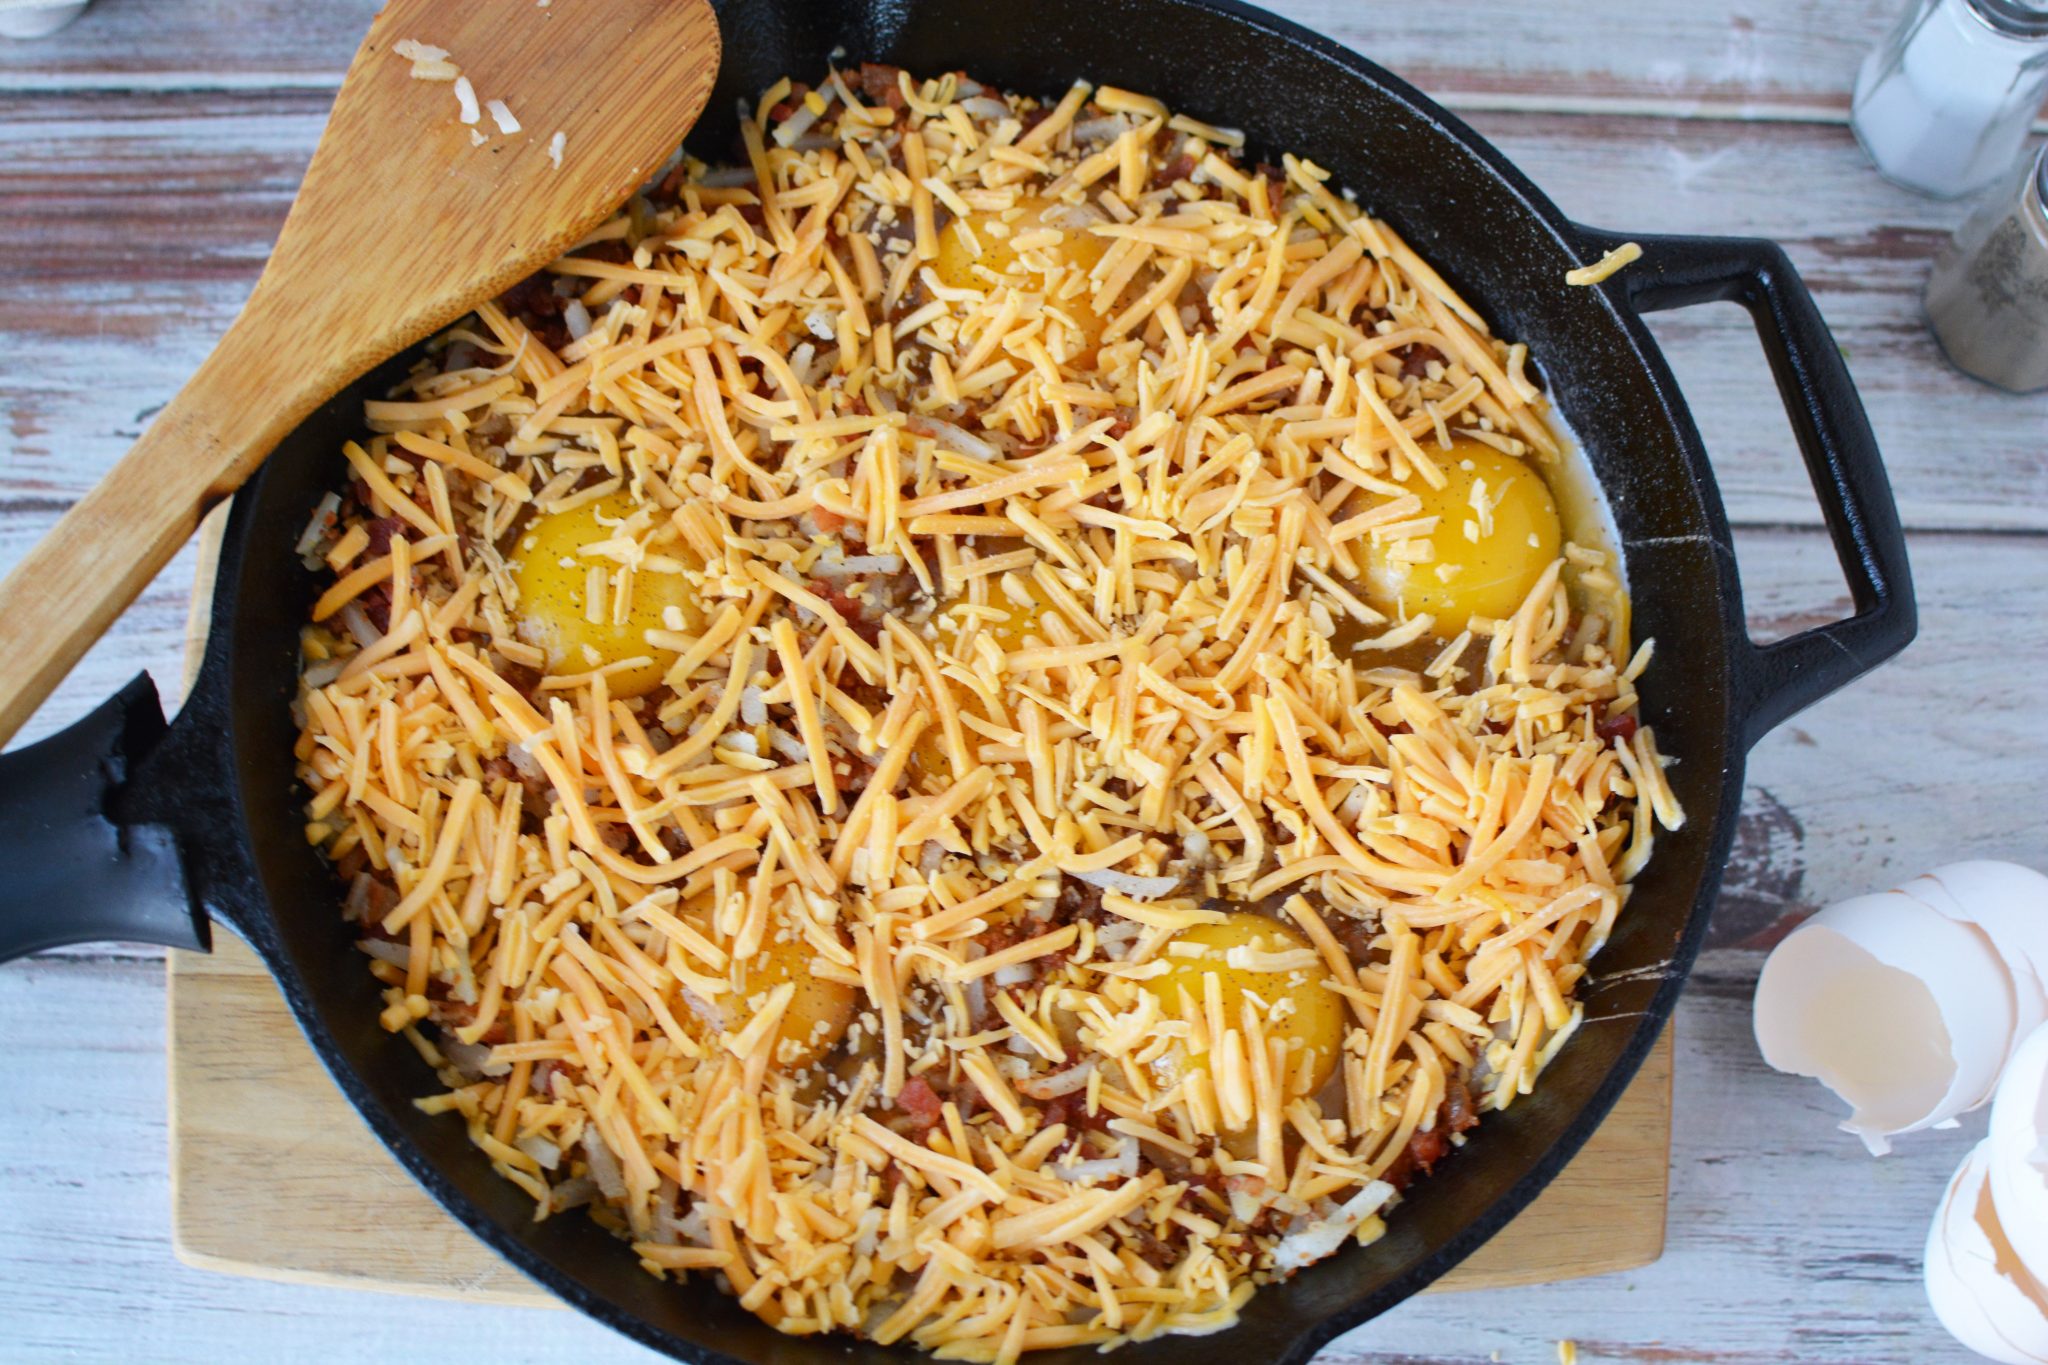 Adding shredded cheese on top of the hashbrowns and eggs 